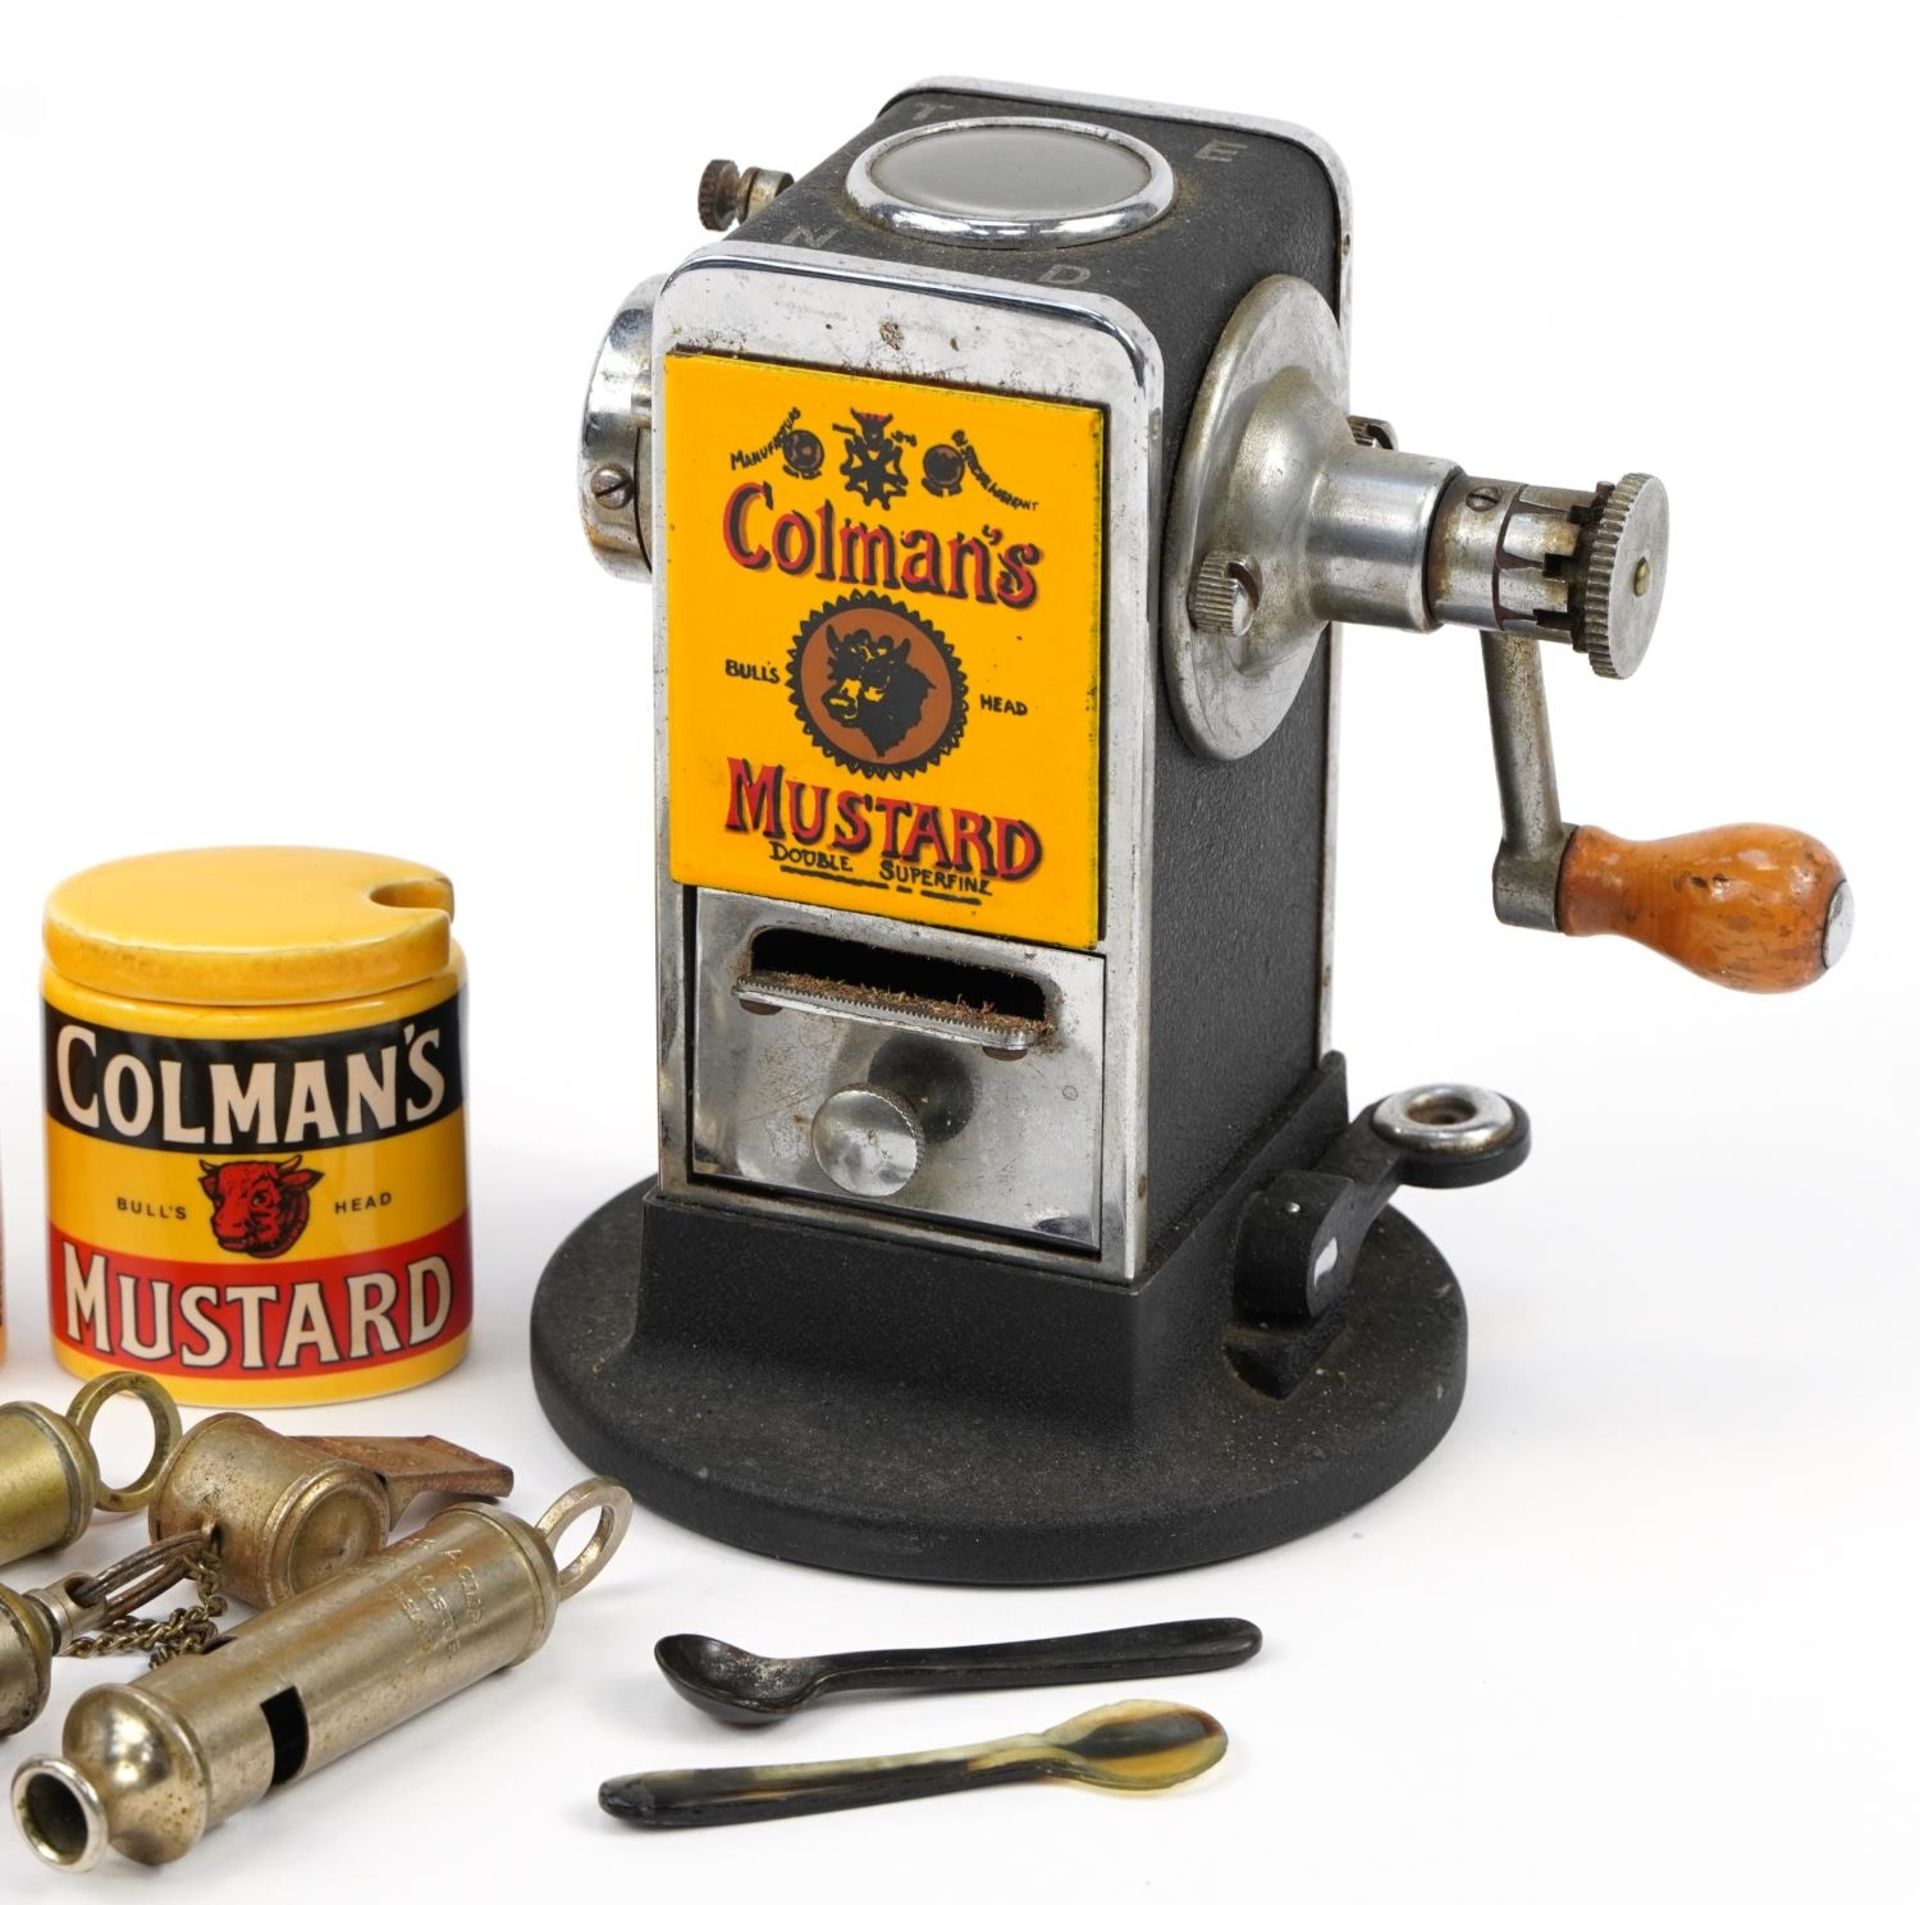 Vintage enamelled Coleman's Mustard pencil sharpener, mustard jars and whistles including The Acme - Image 3 of 4